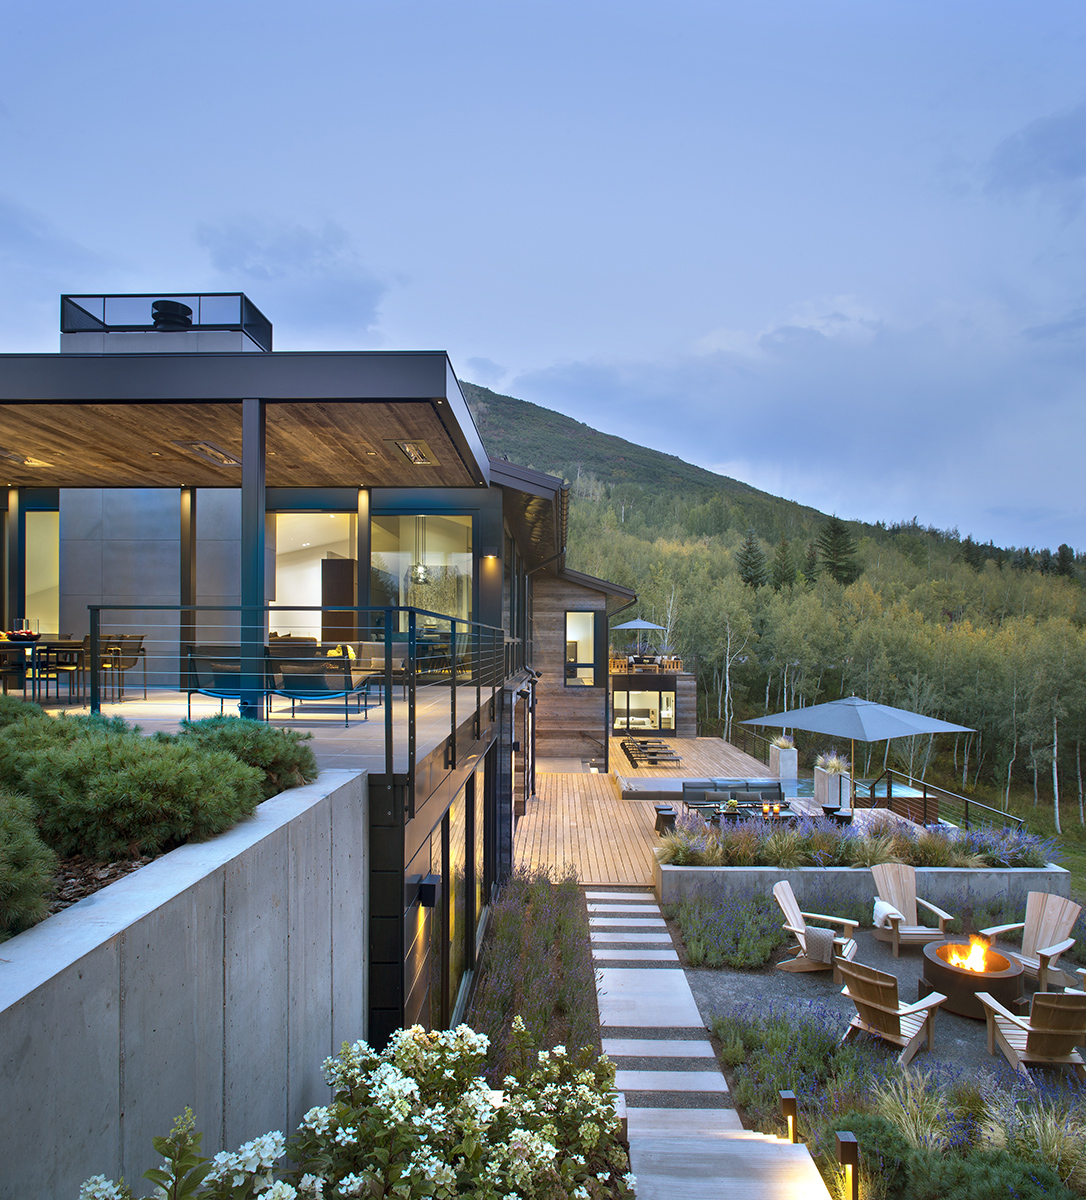 Exterior design of the lookout mountain home